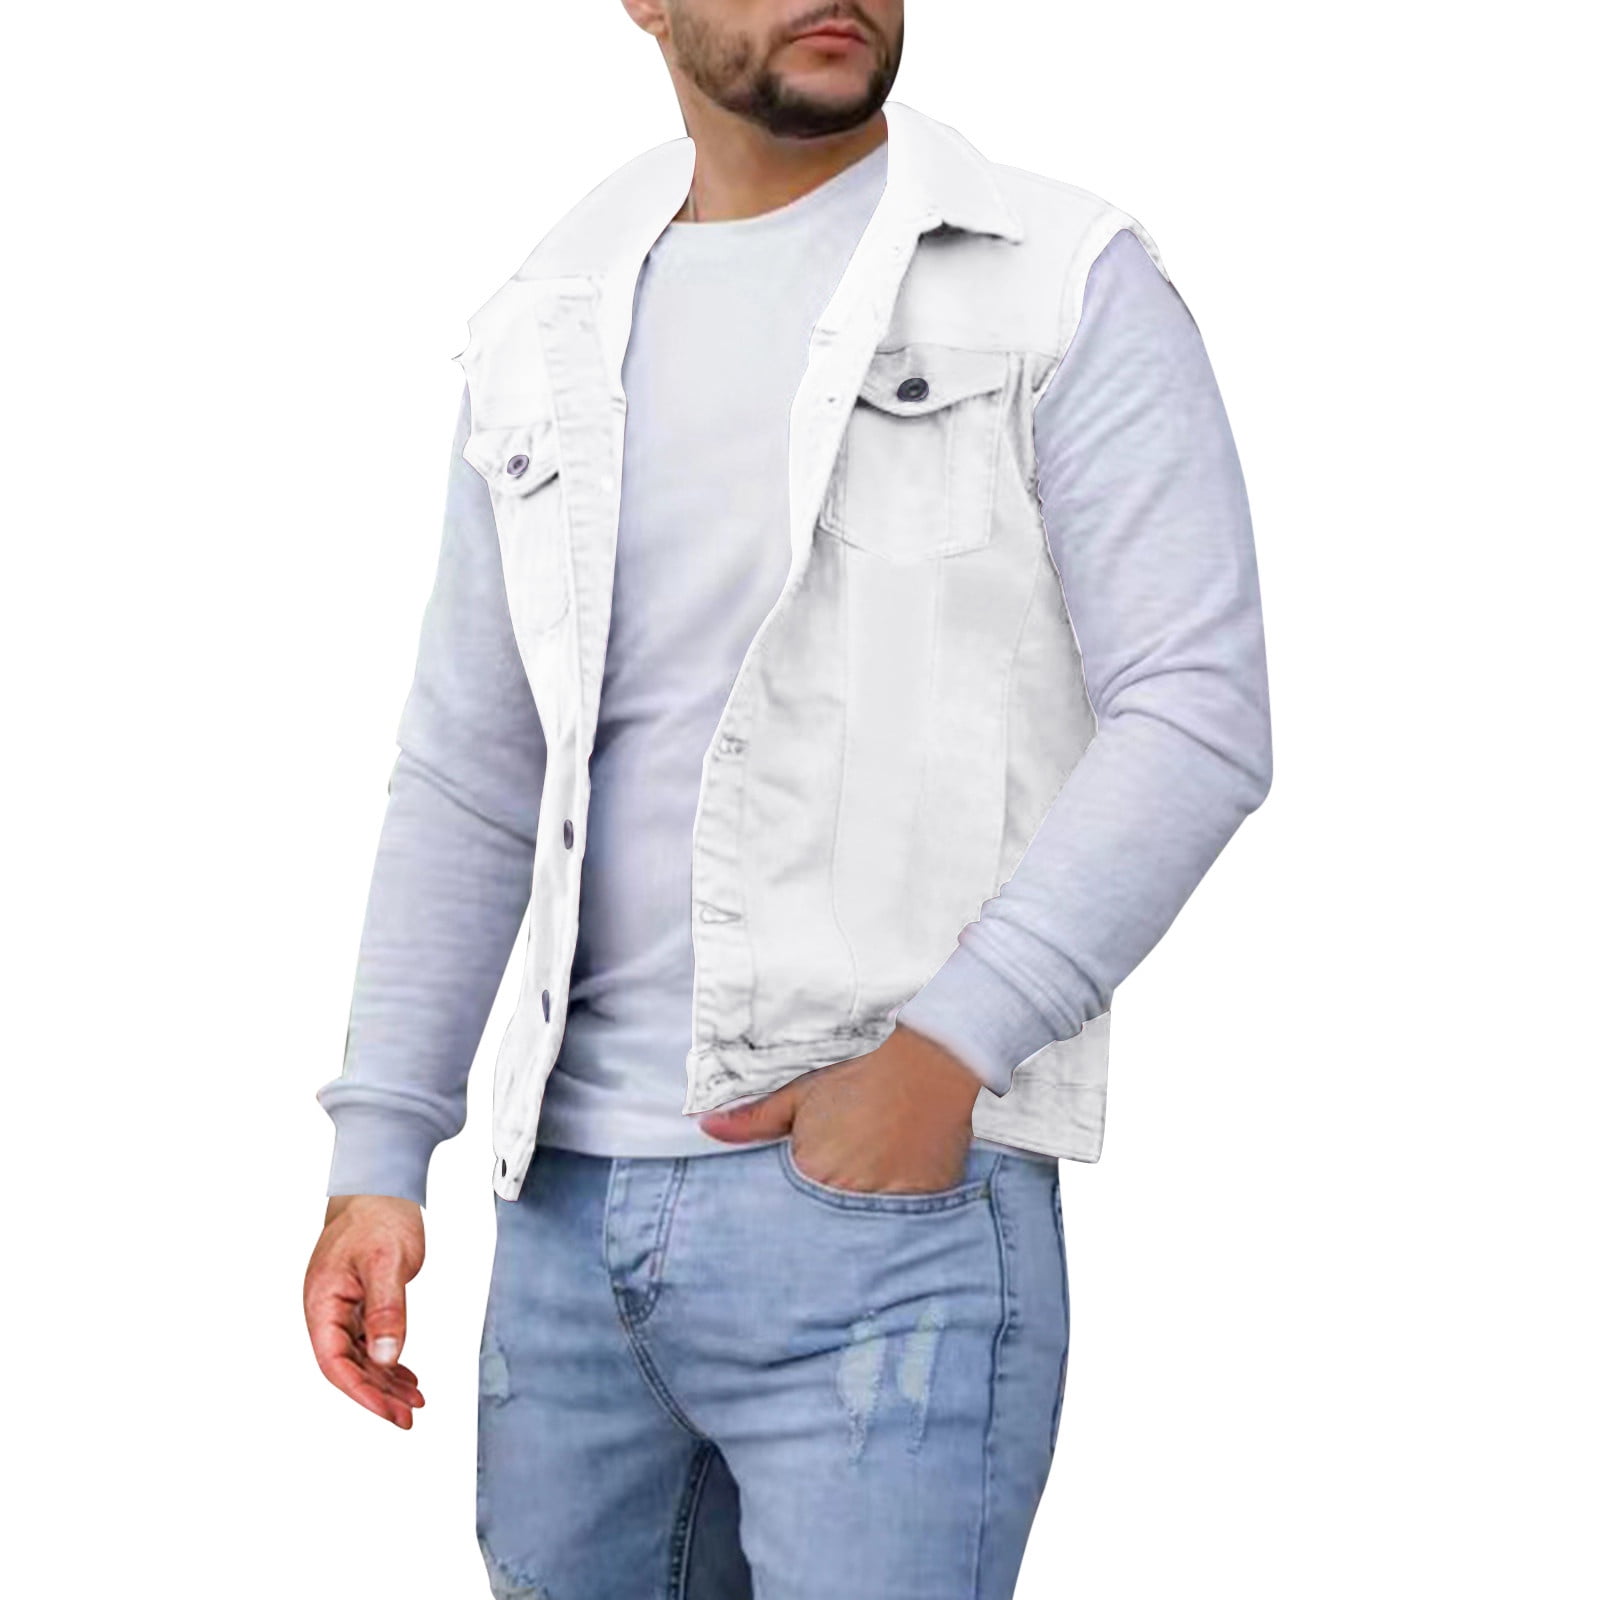 VBXOAE Men's Single-breasted Vest Gilet Fit Breathable Retro Casual  Streetwear Jacket(No ties and shirts) 